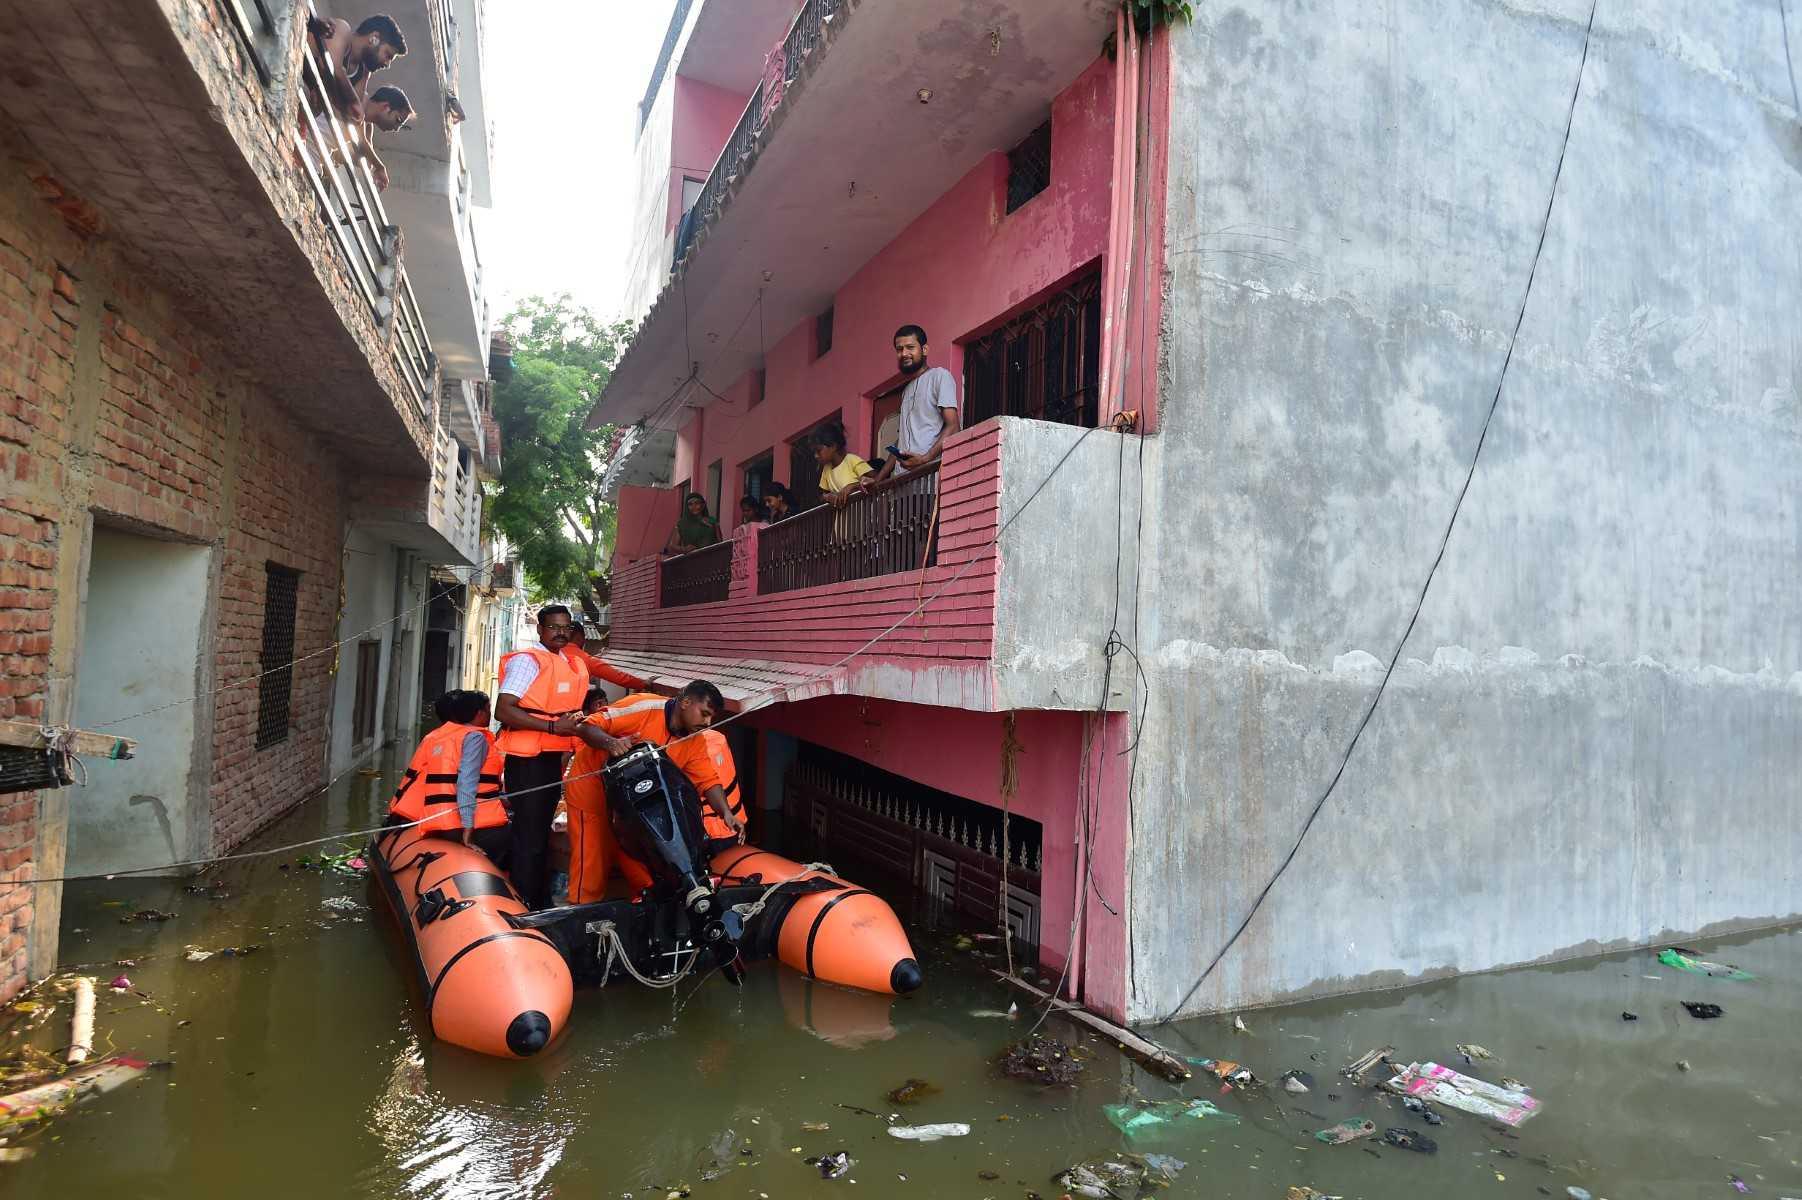 India's National Disaster Response Force personnel distribute food and relief materials to people in flooded areas following heavy monsoon rains that caused the overflowing of the Ganges and Yamuna rivers in Allahabad on Aug 27. Photo: AFP 